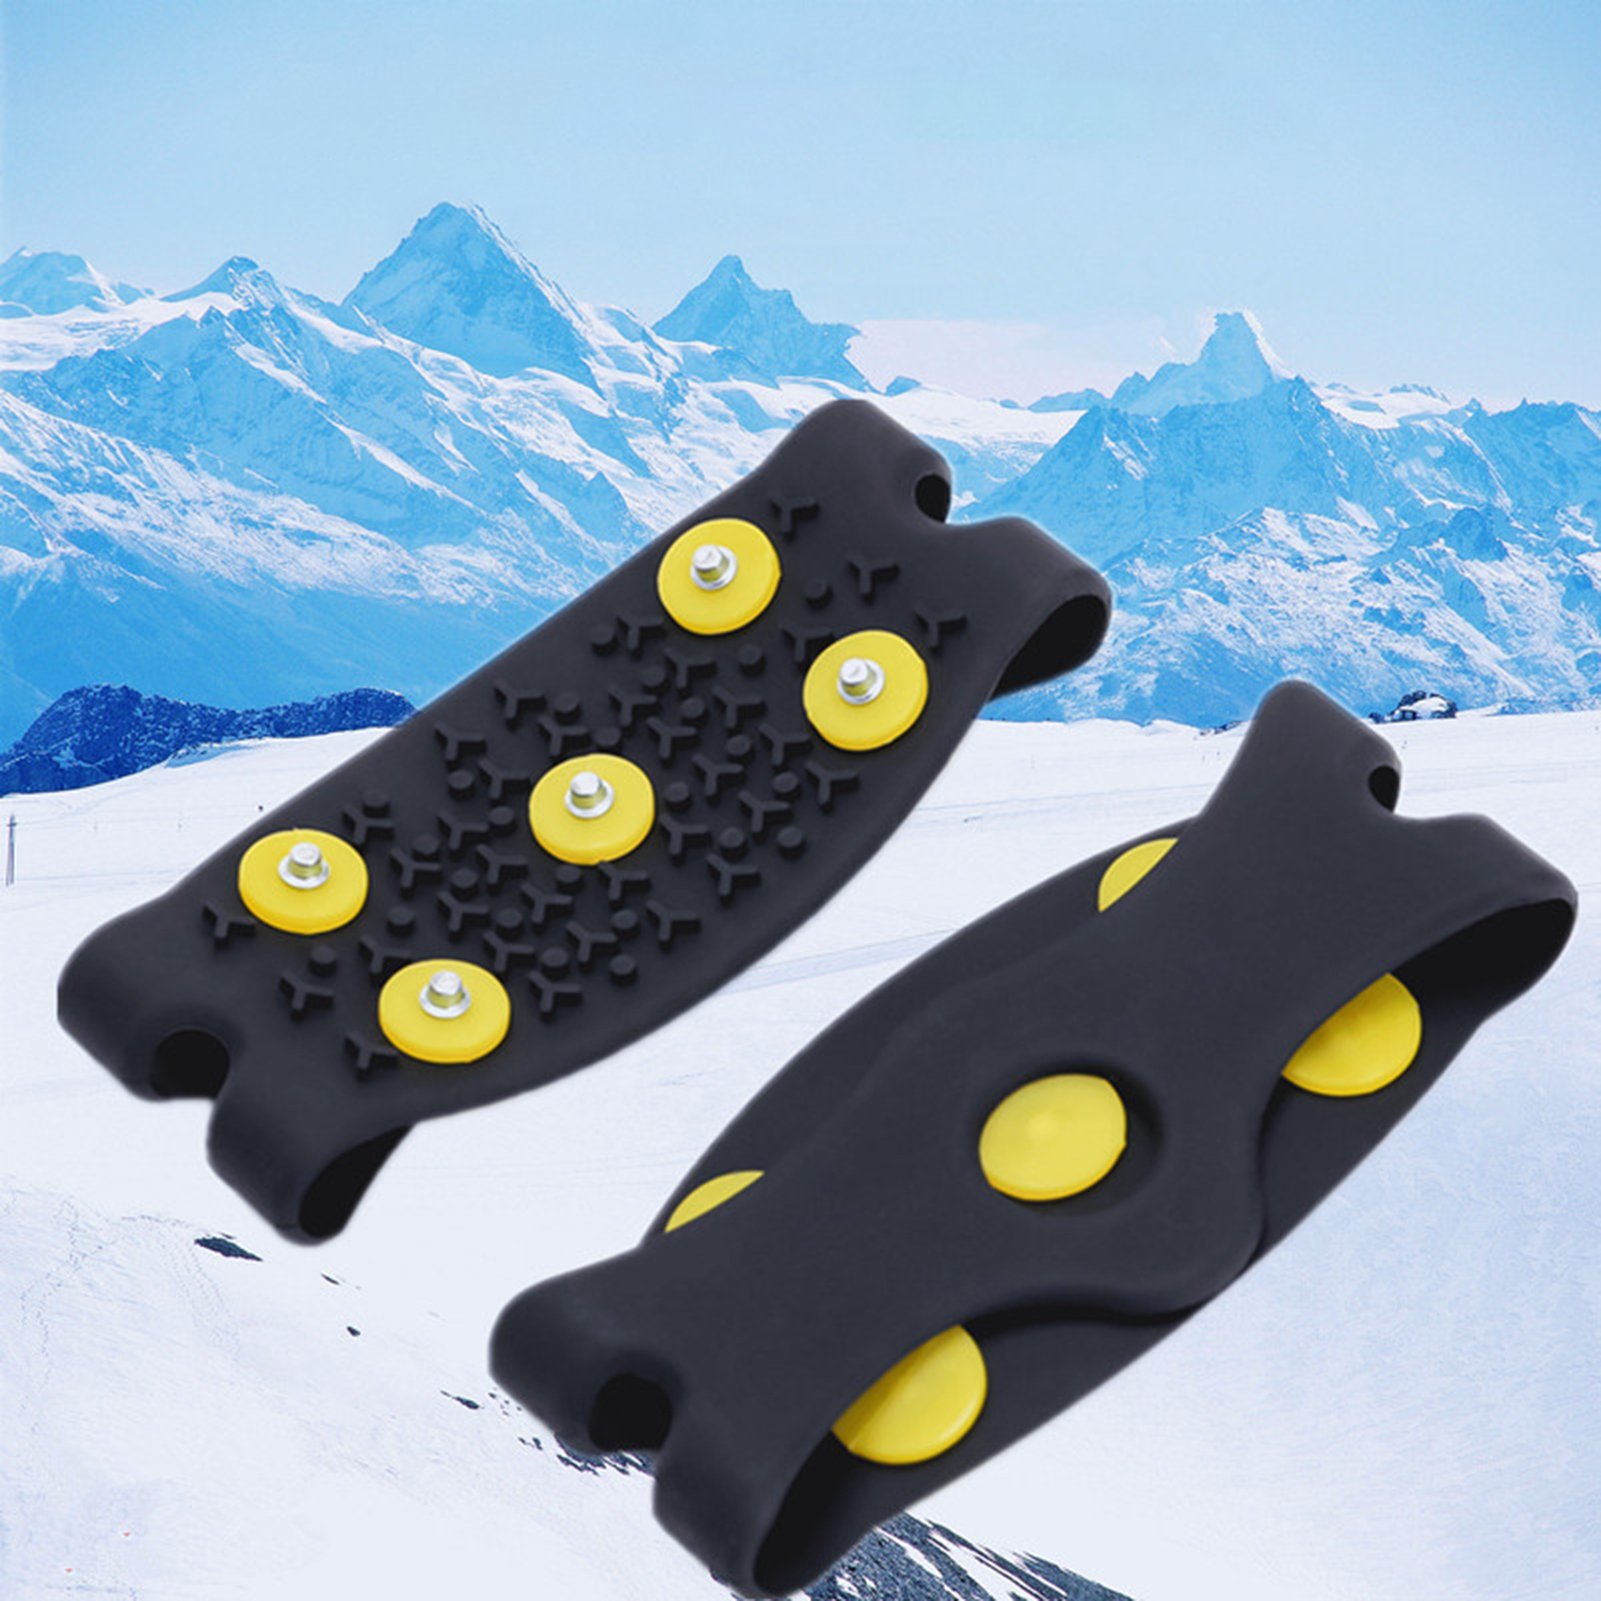 SPRING PARK 1 Pair 5-Stud Shoes Cover Non-Slip Silicone Shoes Cover Crampon Snow Anti Slip Spikes Grips Crampon Cleats Shoes Accessories (Black) - image 3 of 6